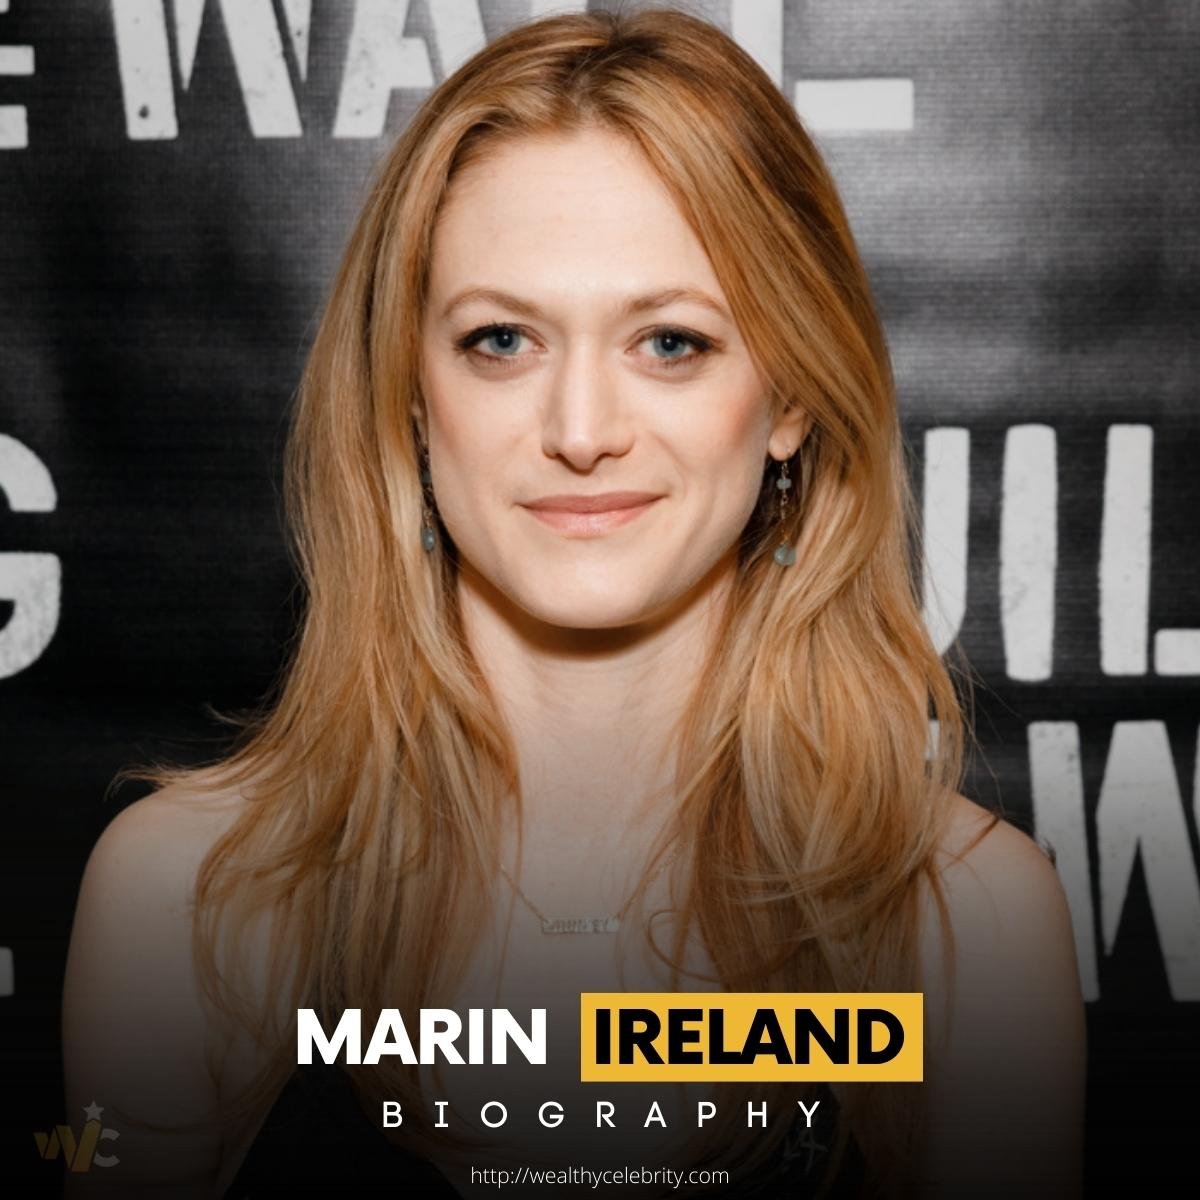 Who is Marin Ireland? Interesting Facts To Know About Her